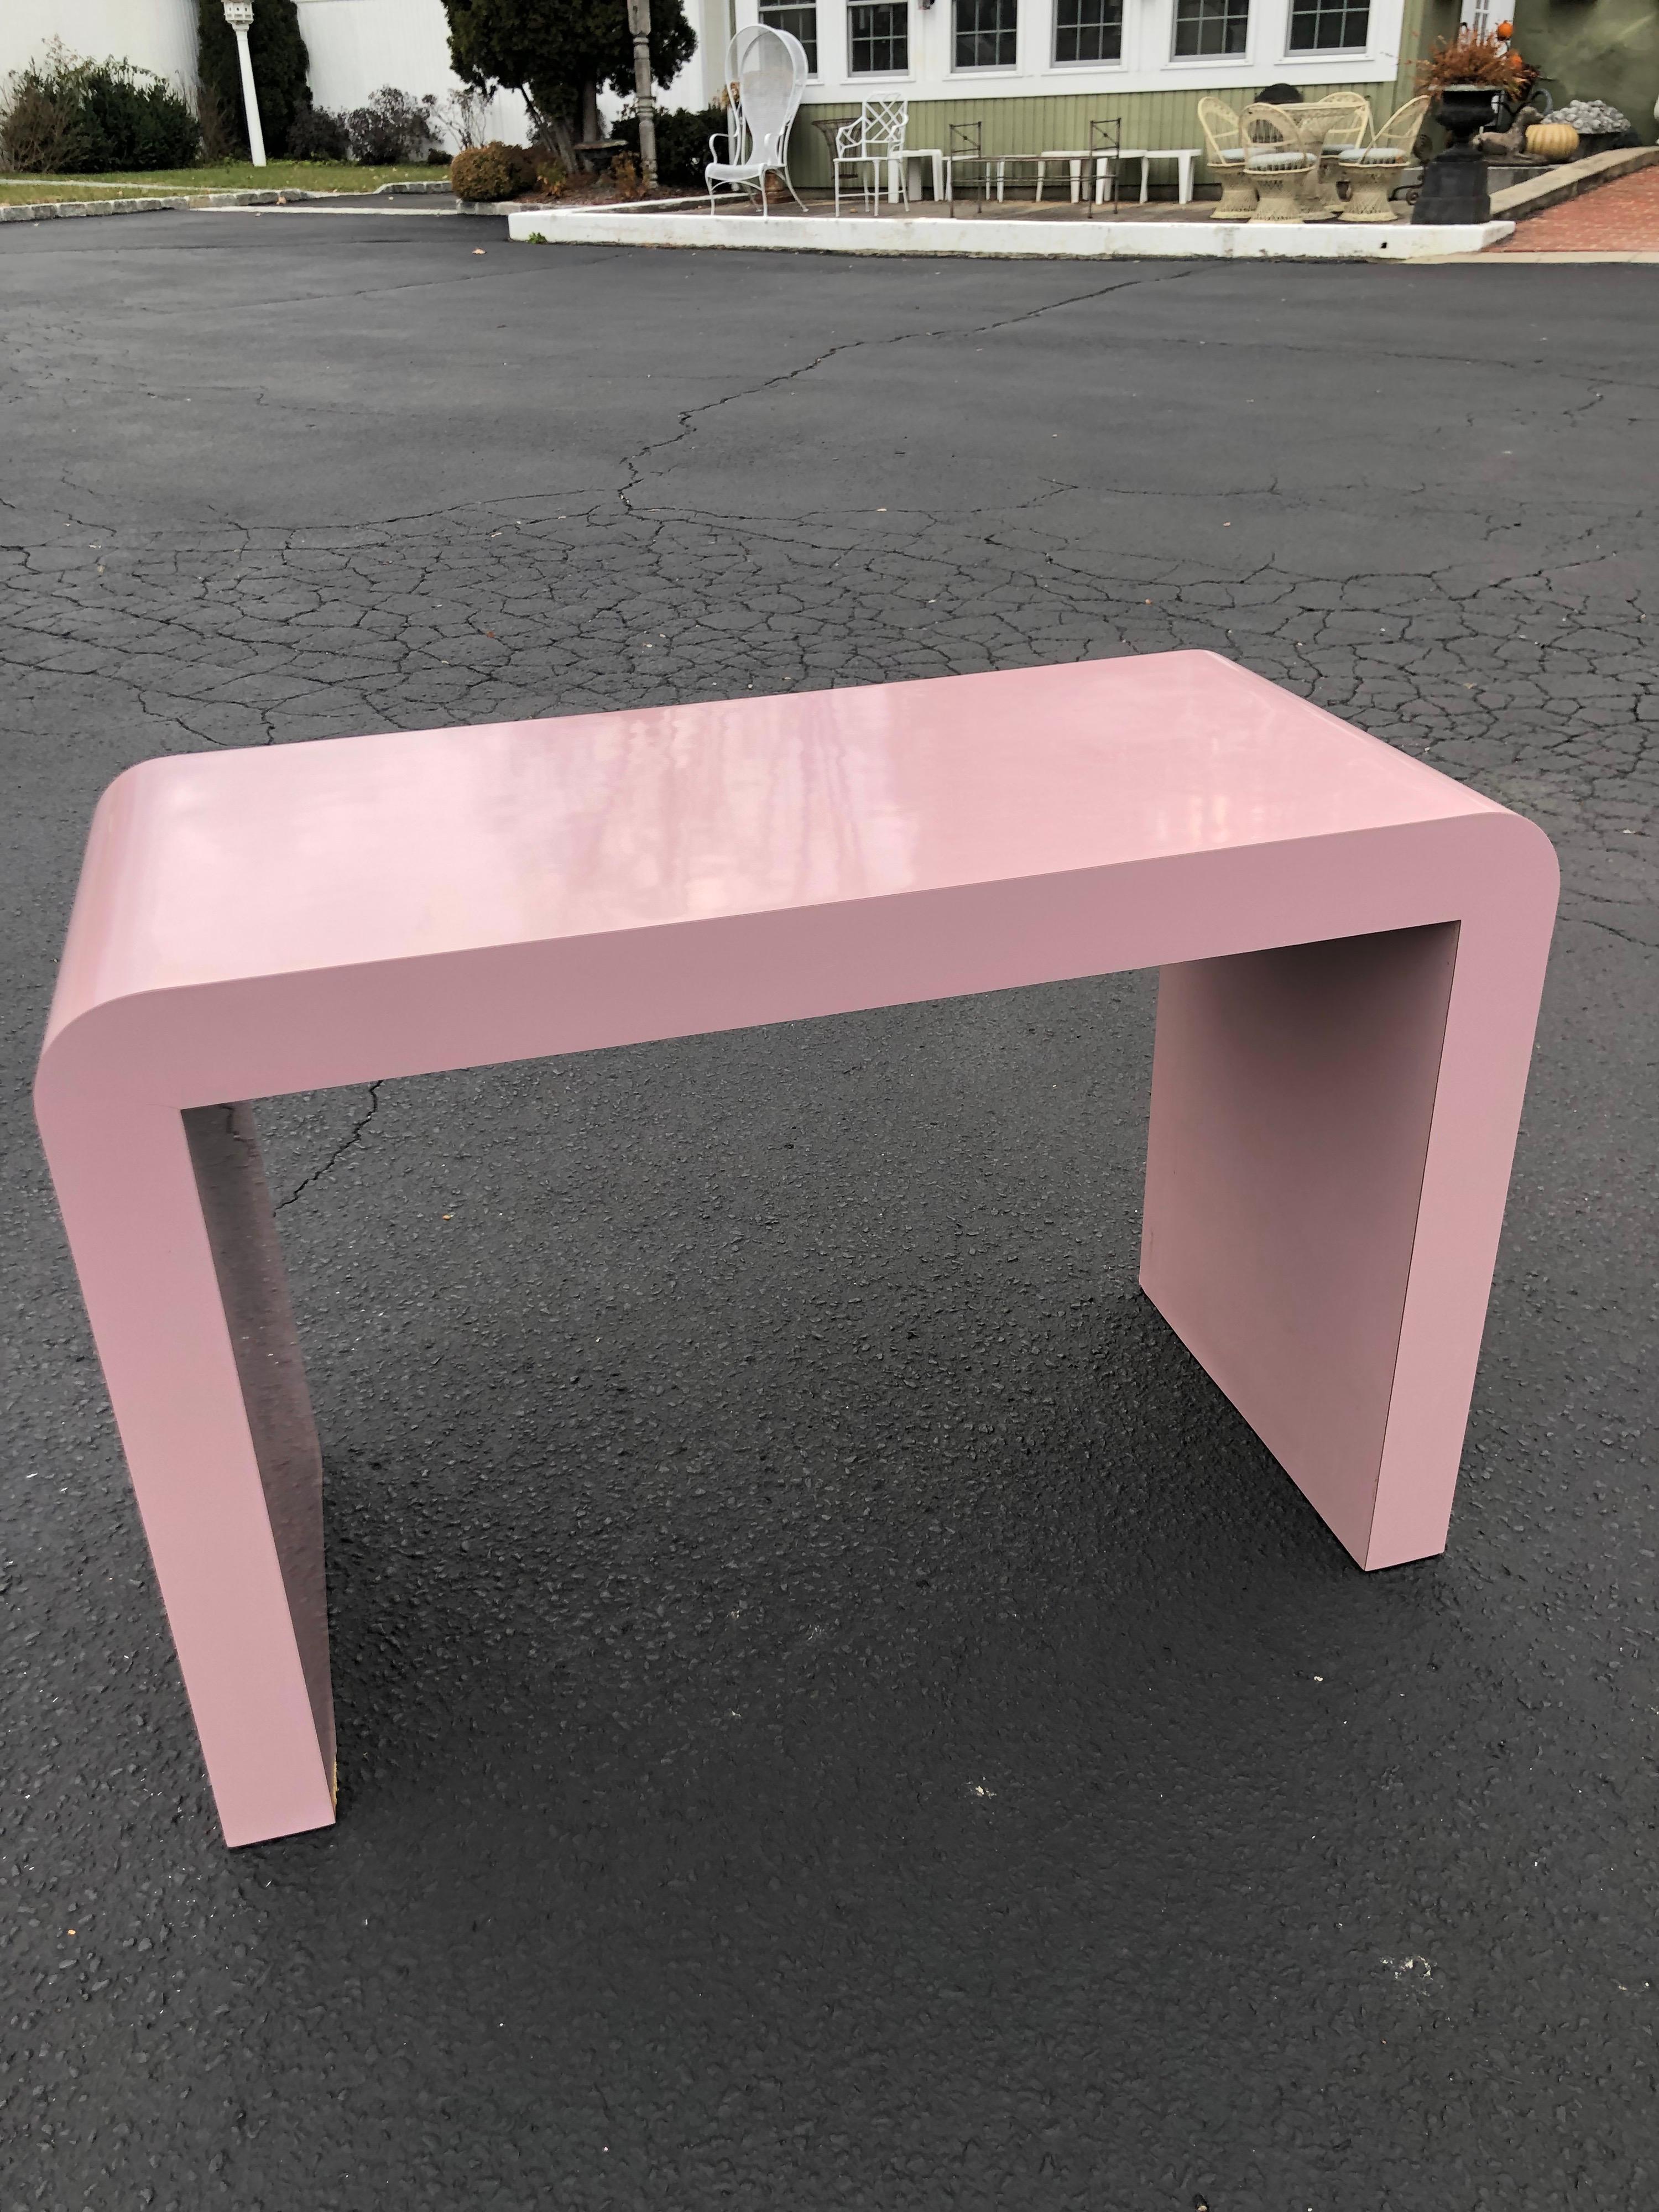 Fabulous Post Modern Laminate piece in Blush Pink. Iconic 80's design and color.
Use as a desk or as a console or entry table. Some wear to laminate see photos.